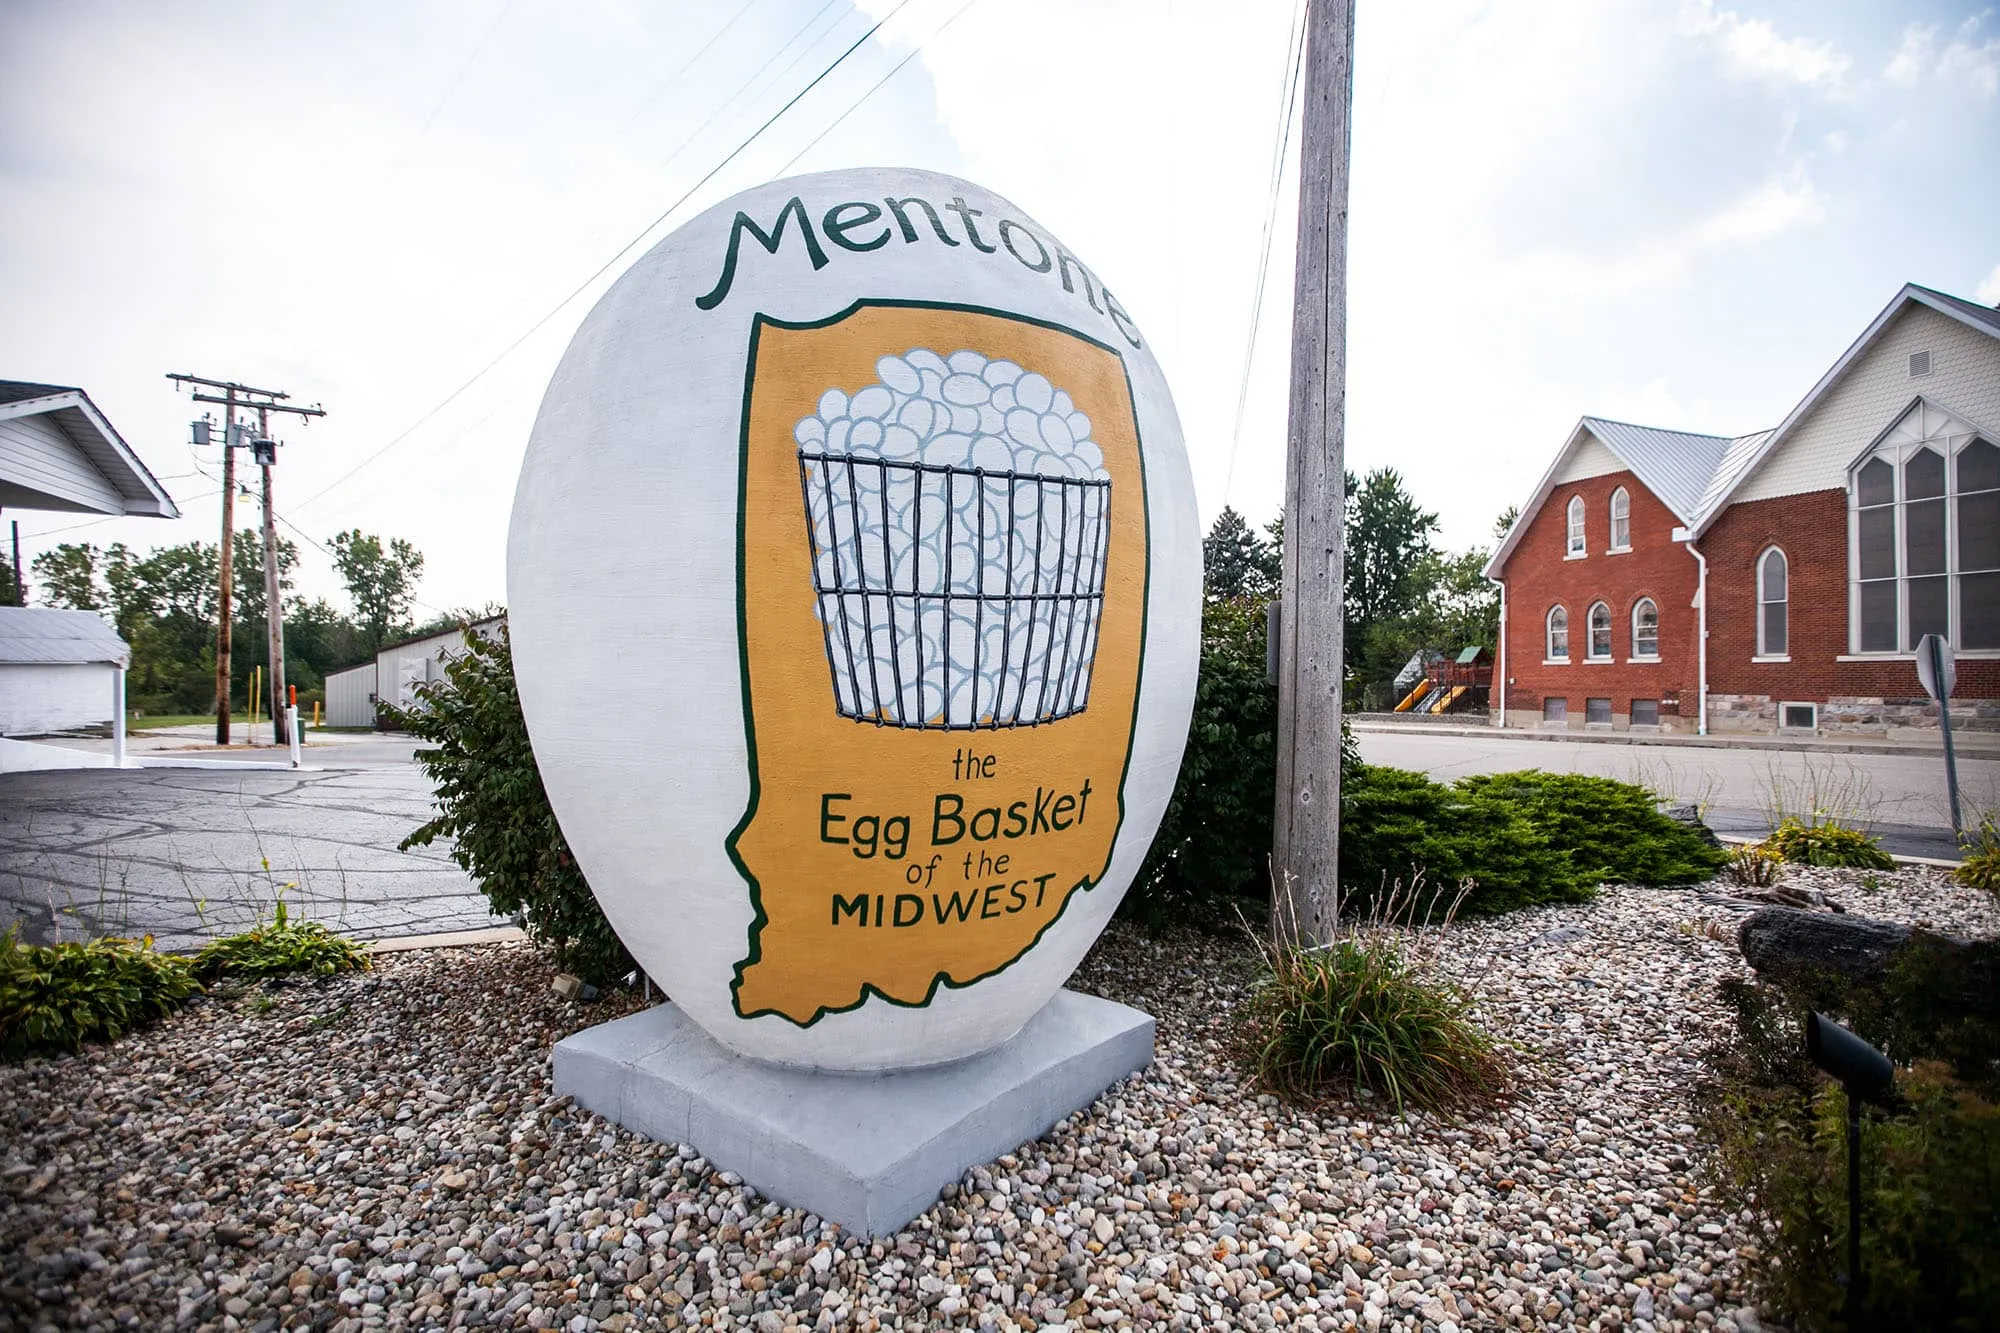 World’s Largest Egg in Mentone, Indiana